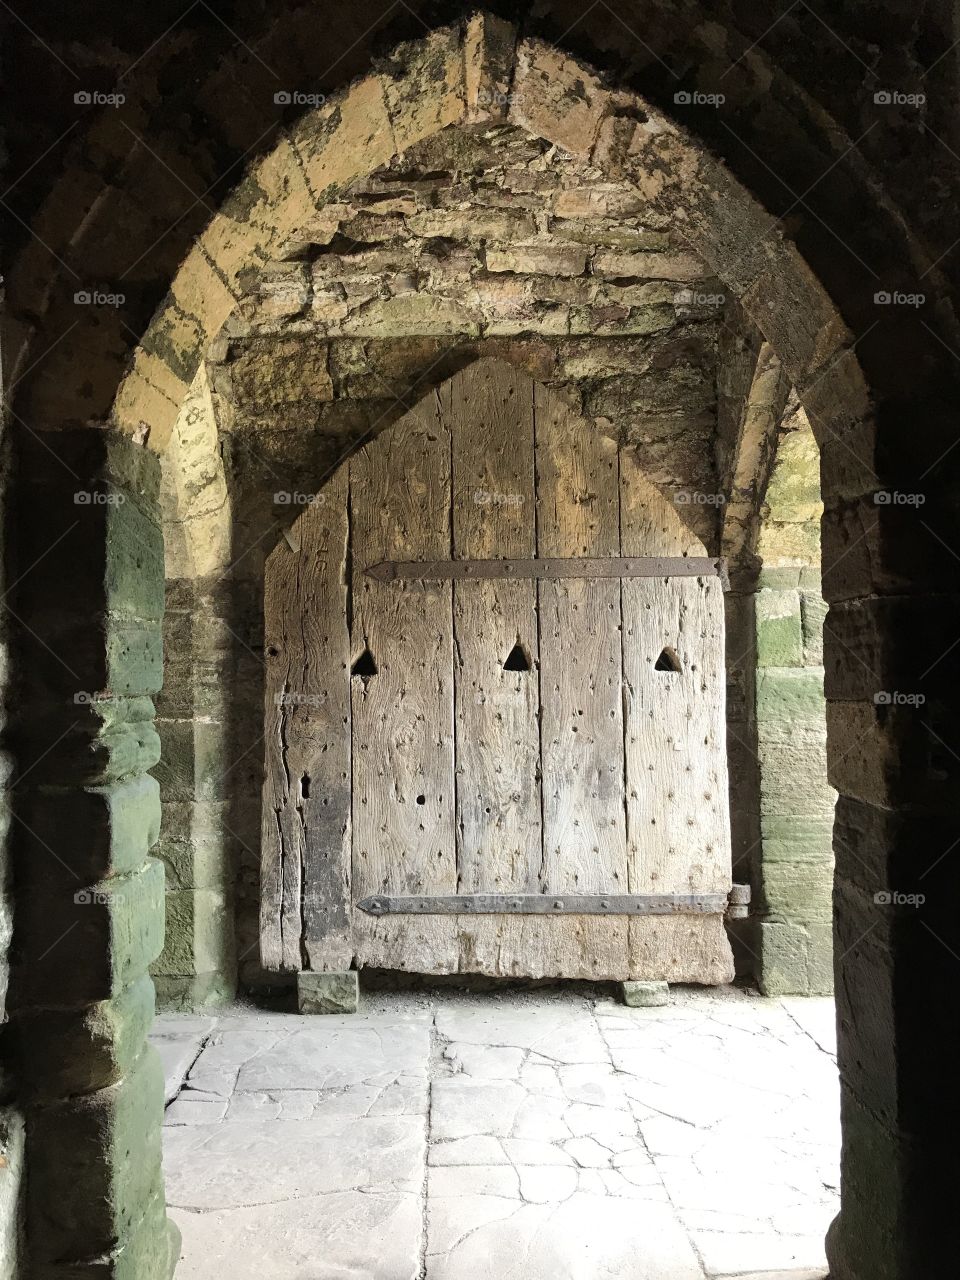 One of the few original doors from the original construction of Chepstow Castle. 
Chepstow, Wales, United Kingdom 